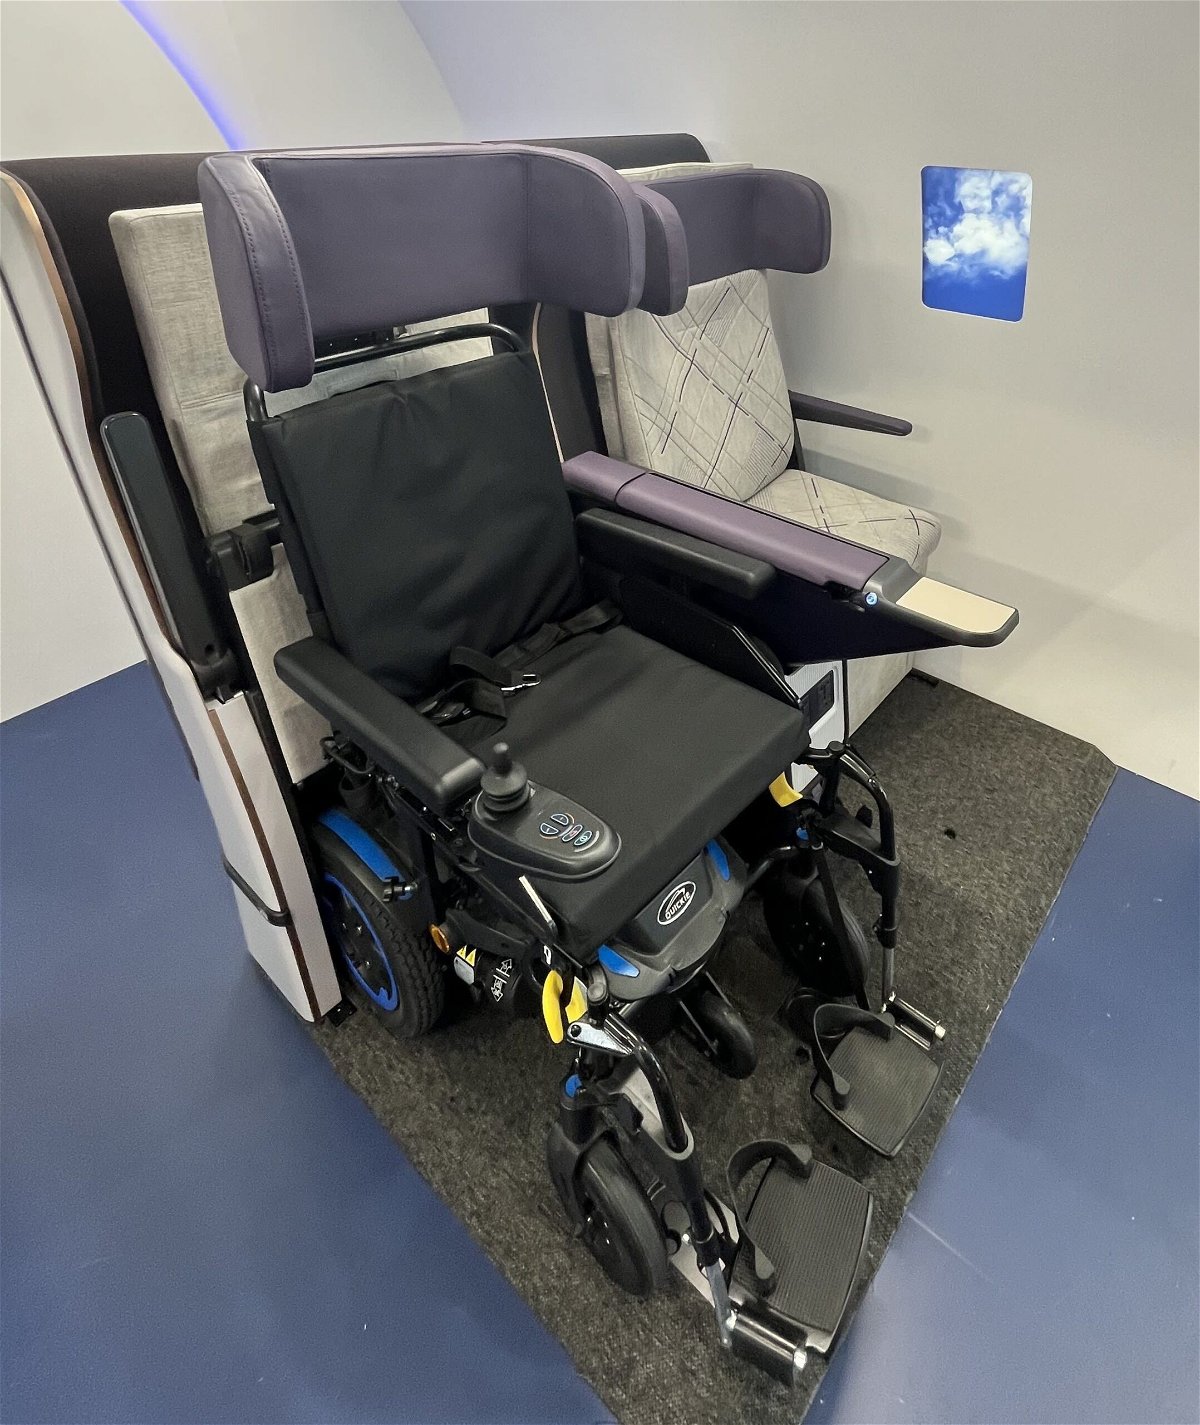 <i>Francesca Street/CNN</i><br/>Here's the seat prototype in its wheelchair mode on display at the Airline Interiors Expo in Hamburg